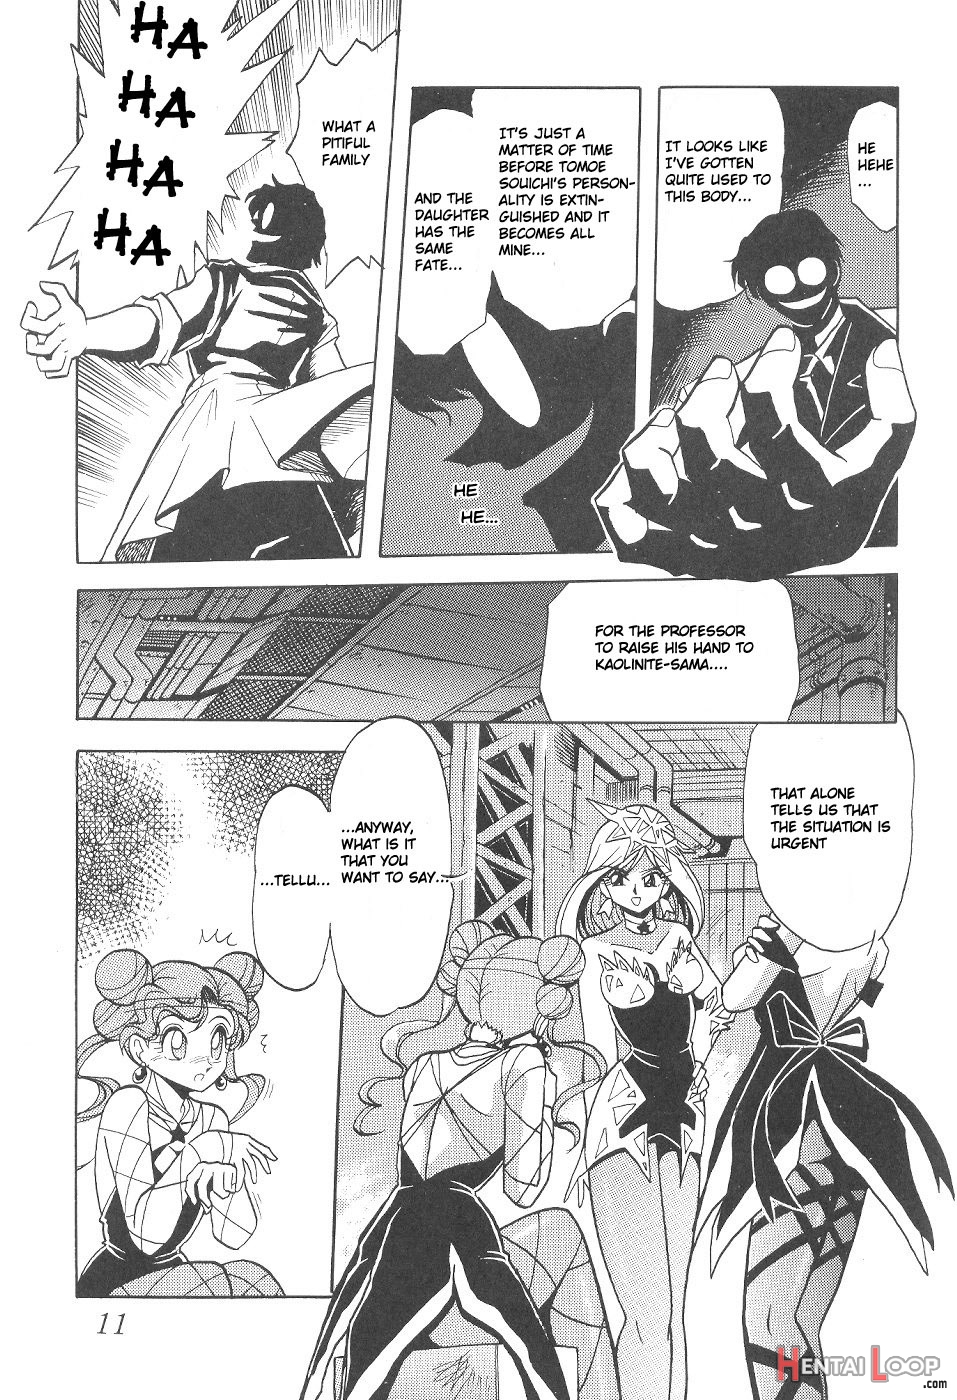 Silent Saturn 4 page 11